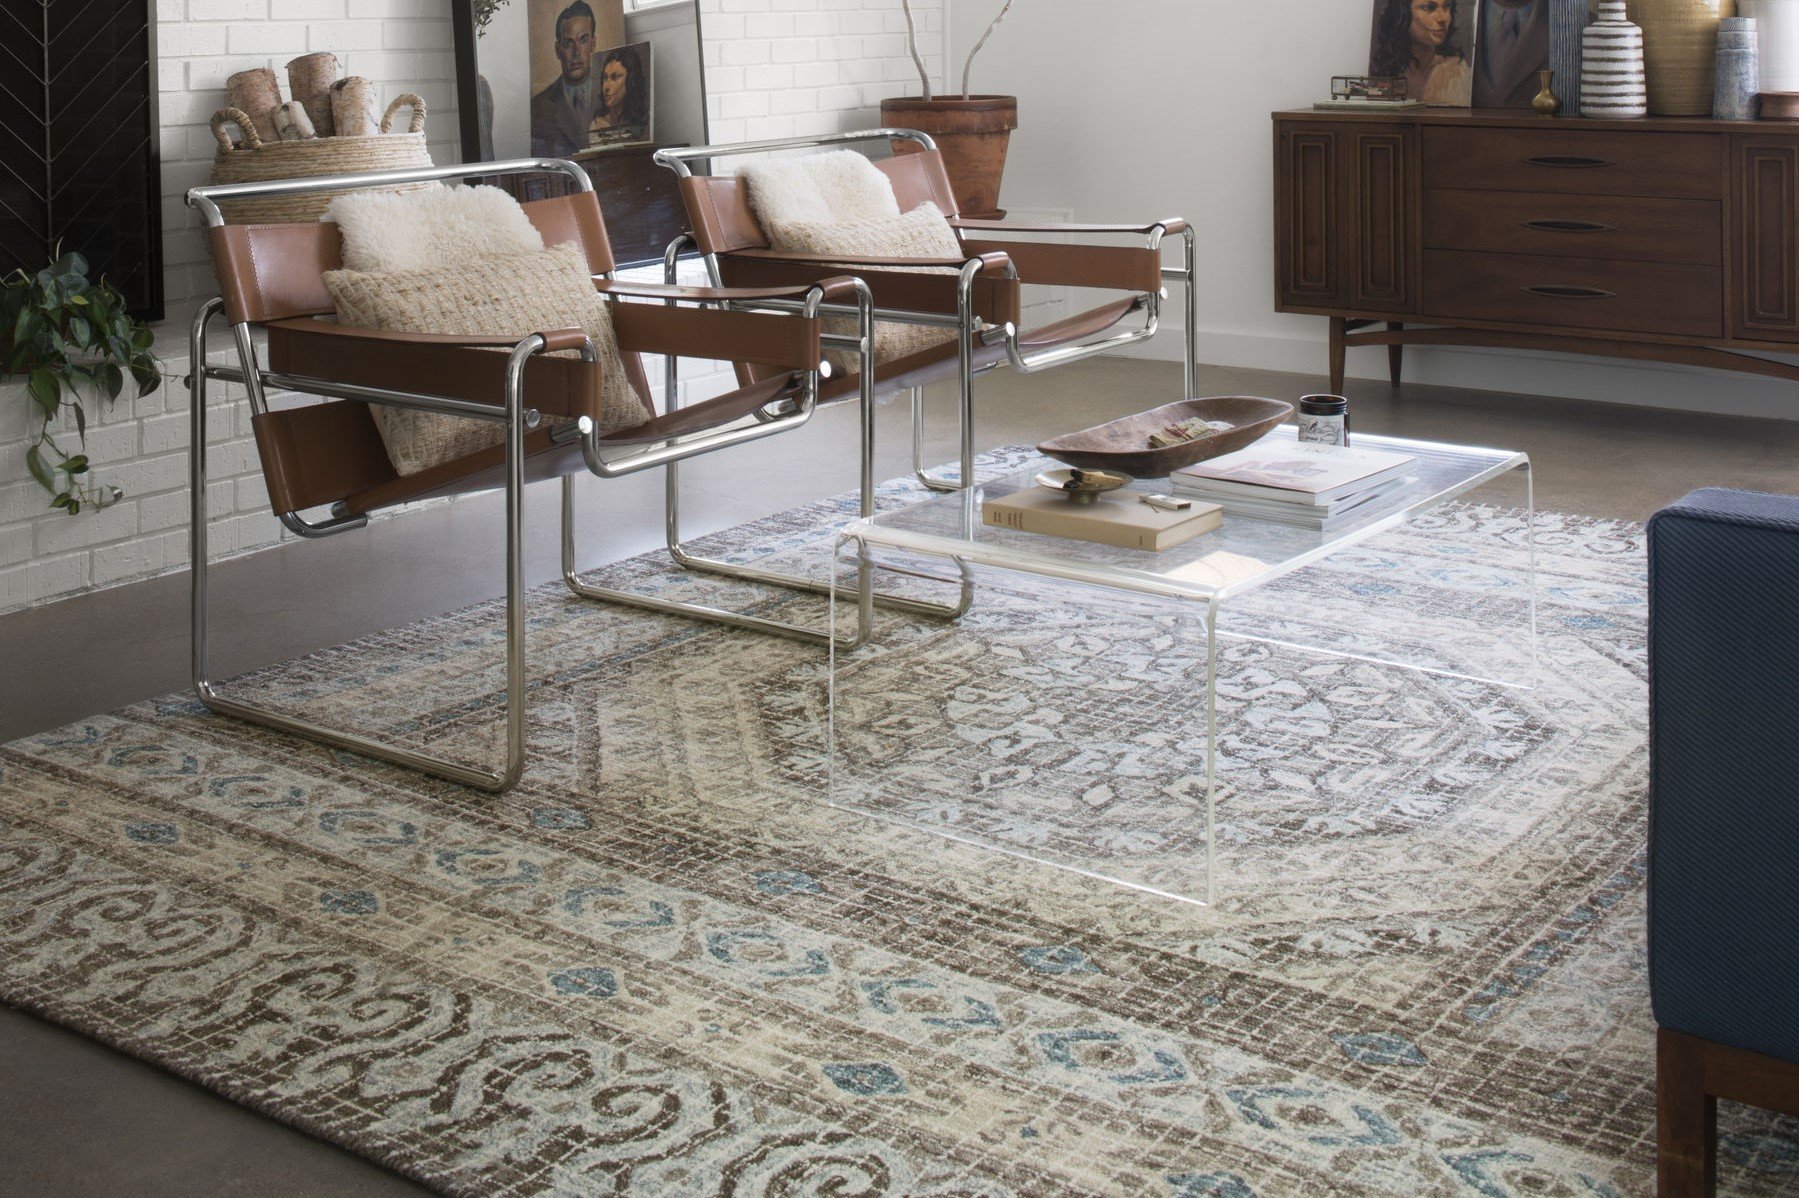 What is the Largest Area Rug Size?